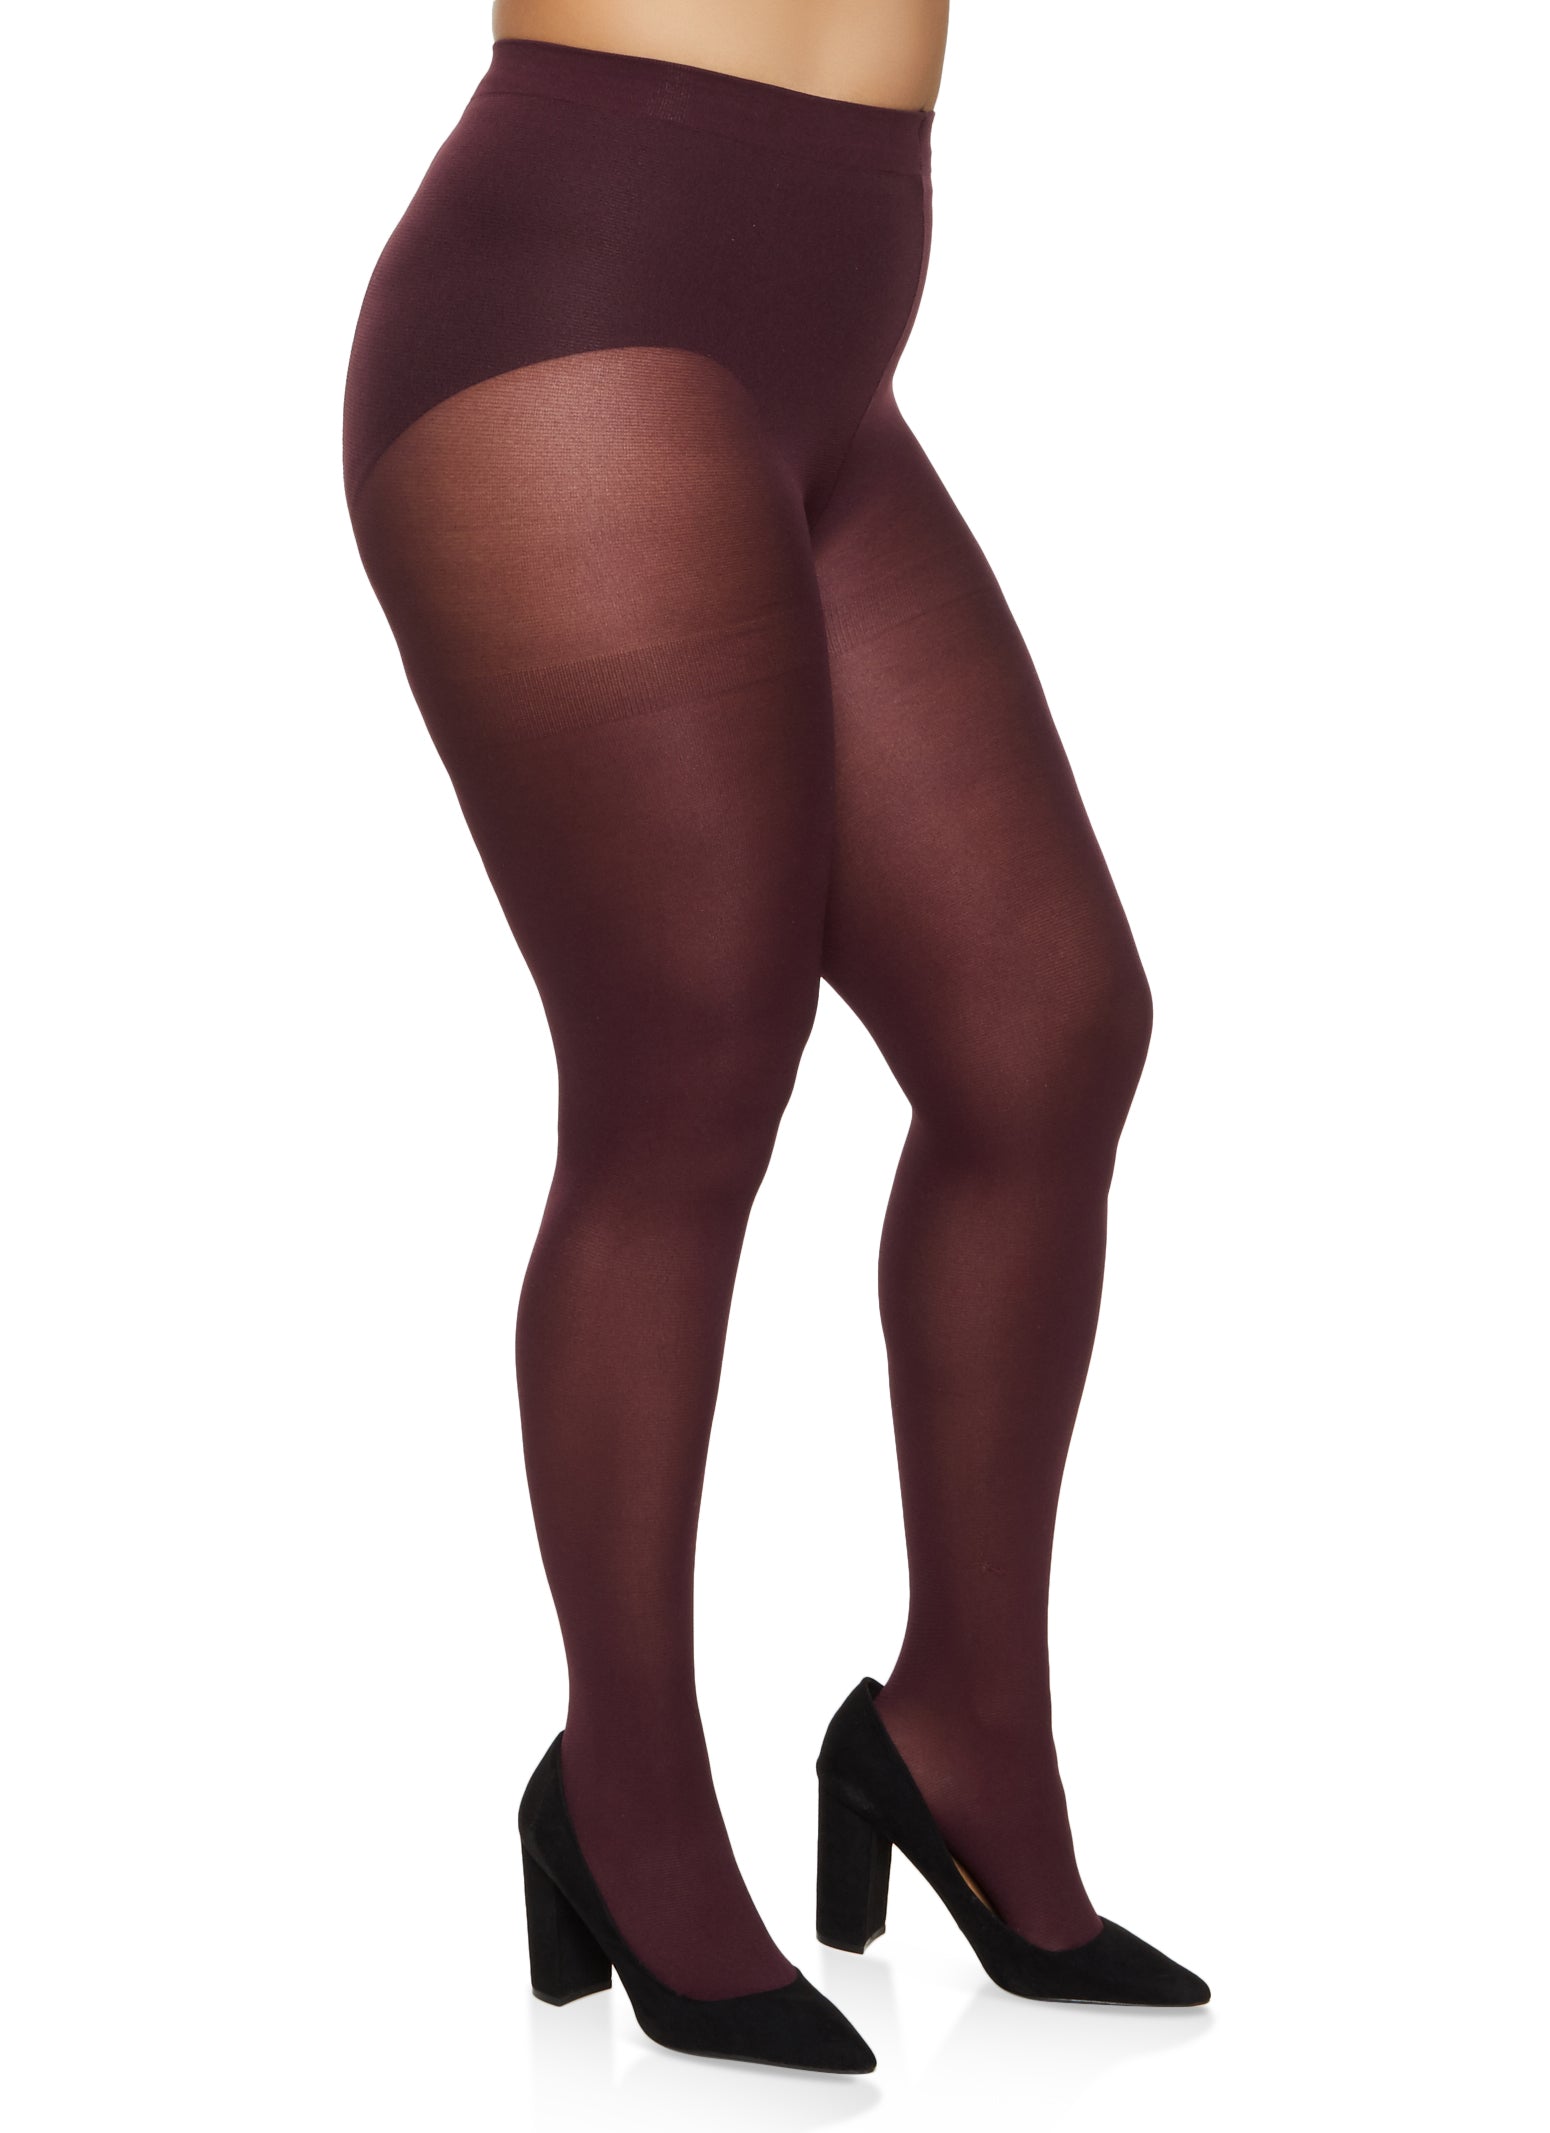 Plus Size Opaque High Waisted Tights - Burgundy